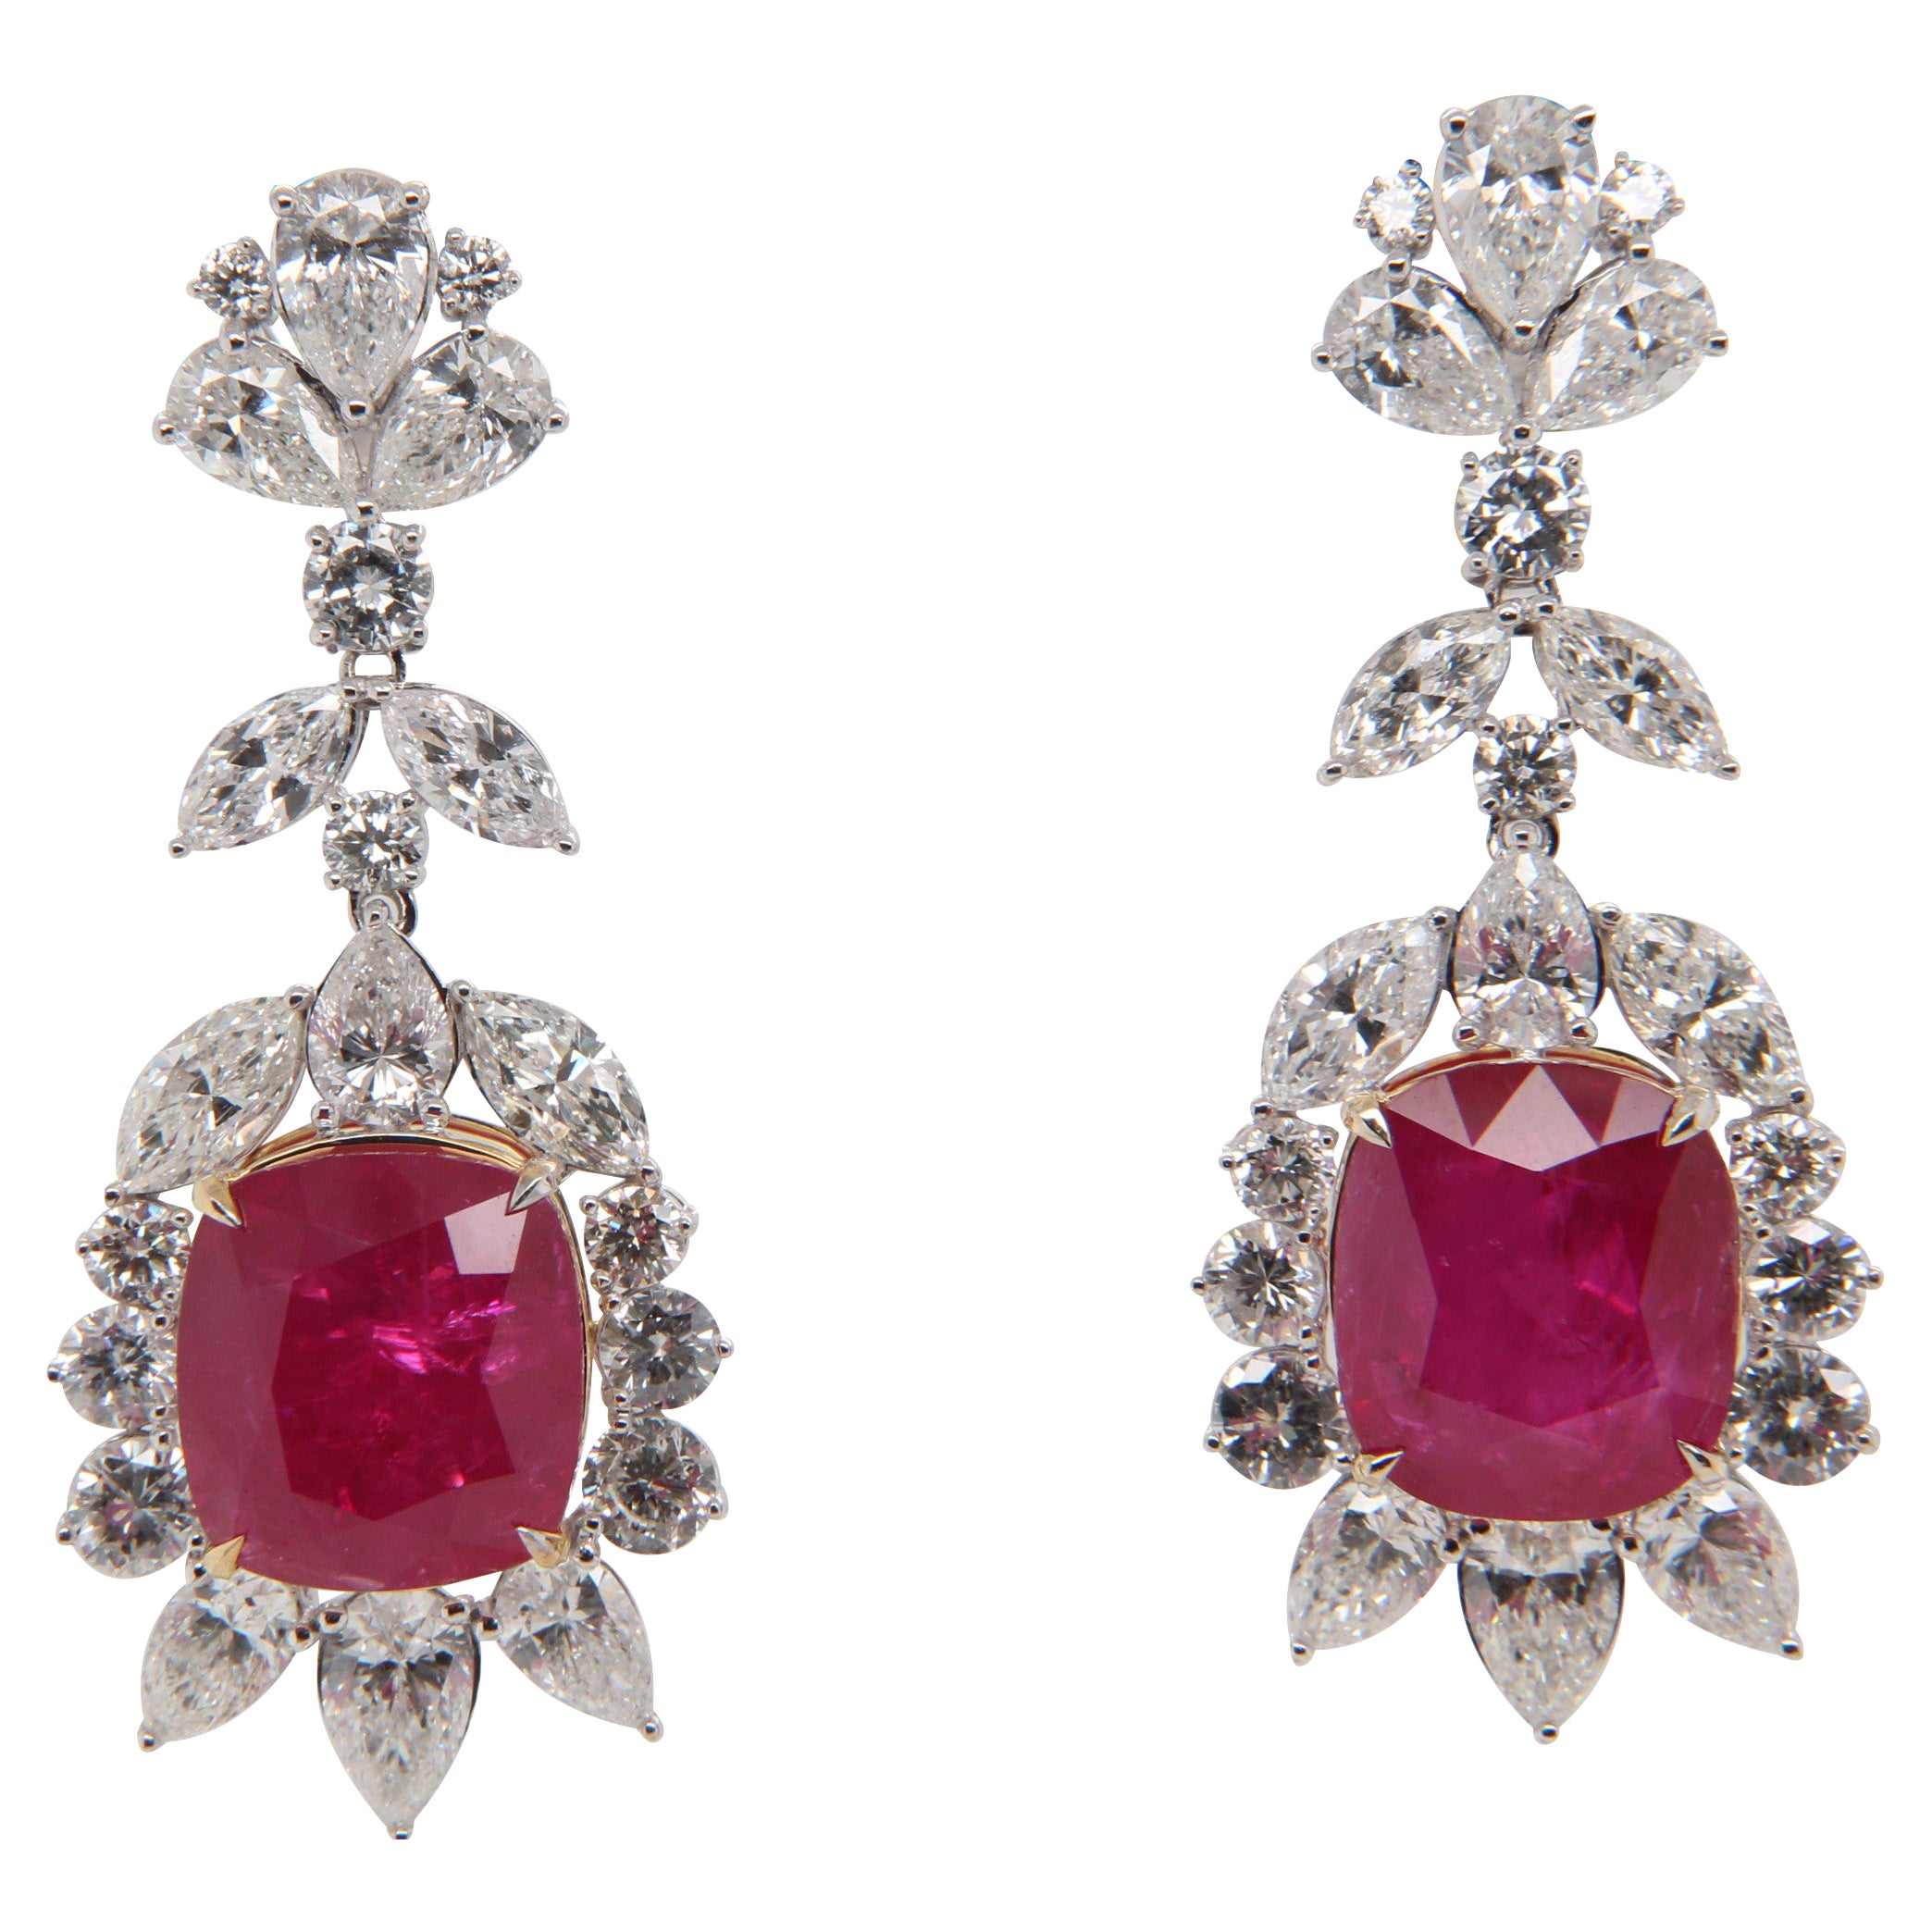 GRS 13 Carat Burmese No Heat 'Red' Ruby and Diamond Earring in 18K Gold